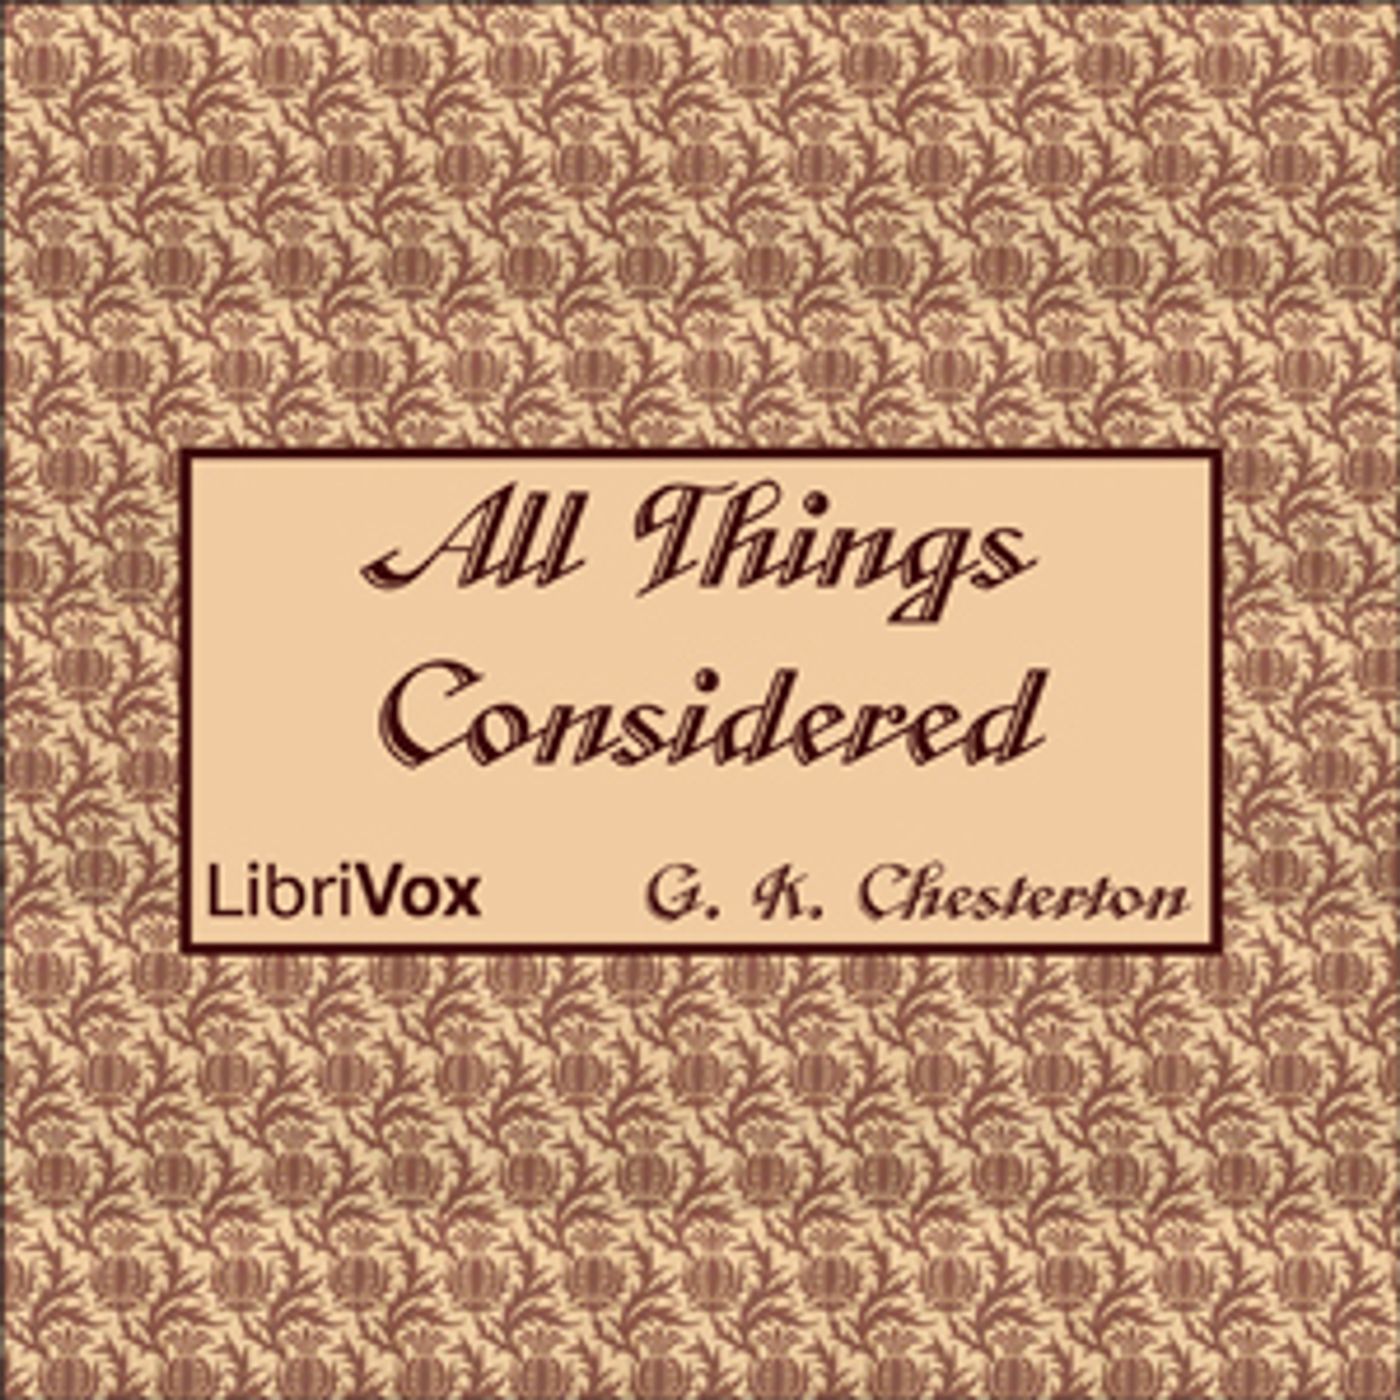 All Things Considered by G. K. Chesterton (1874 – 1936)